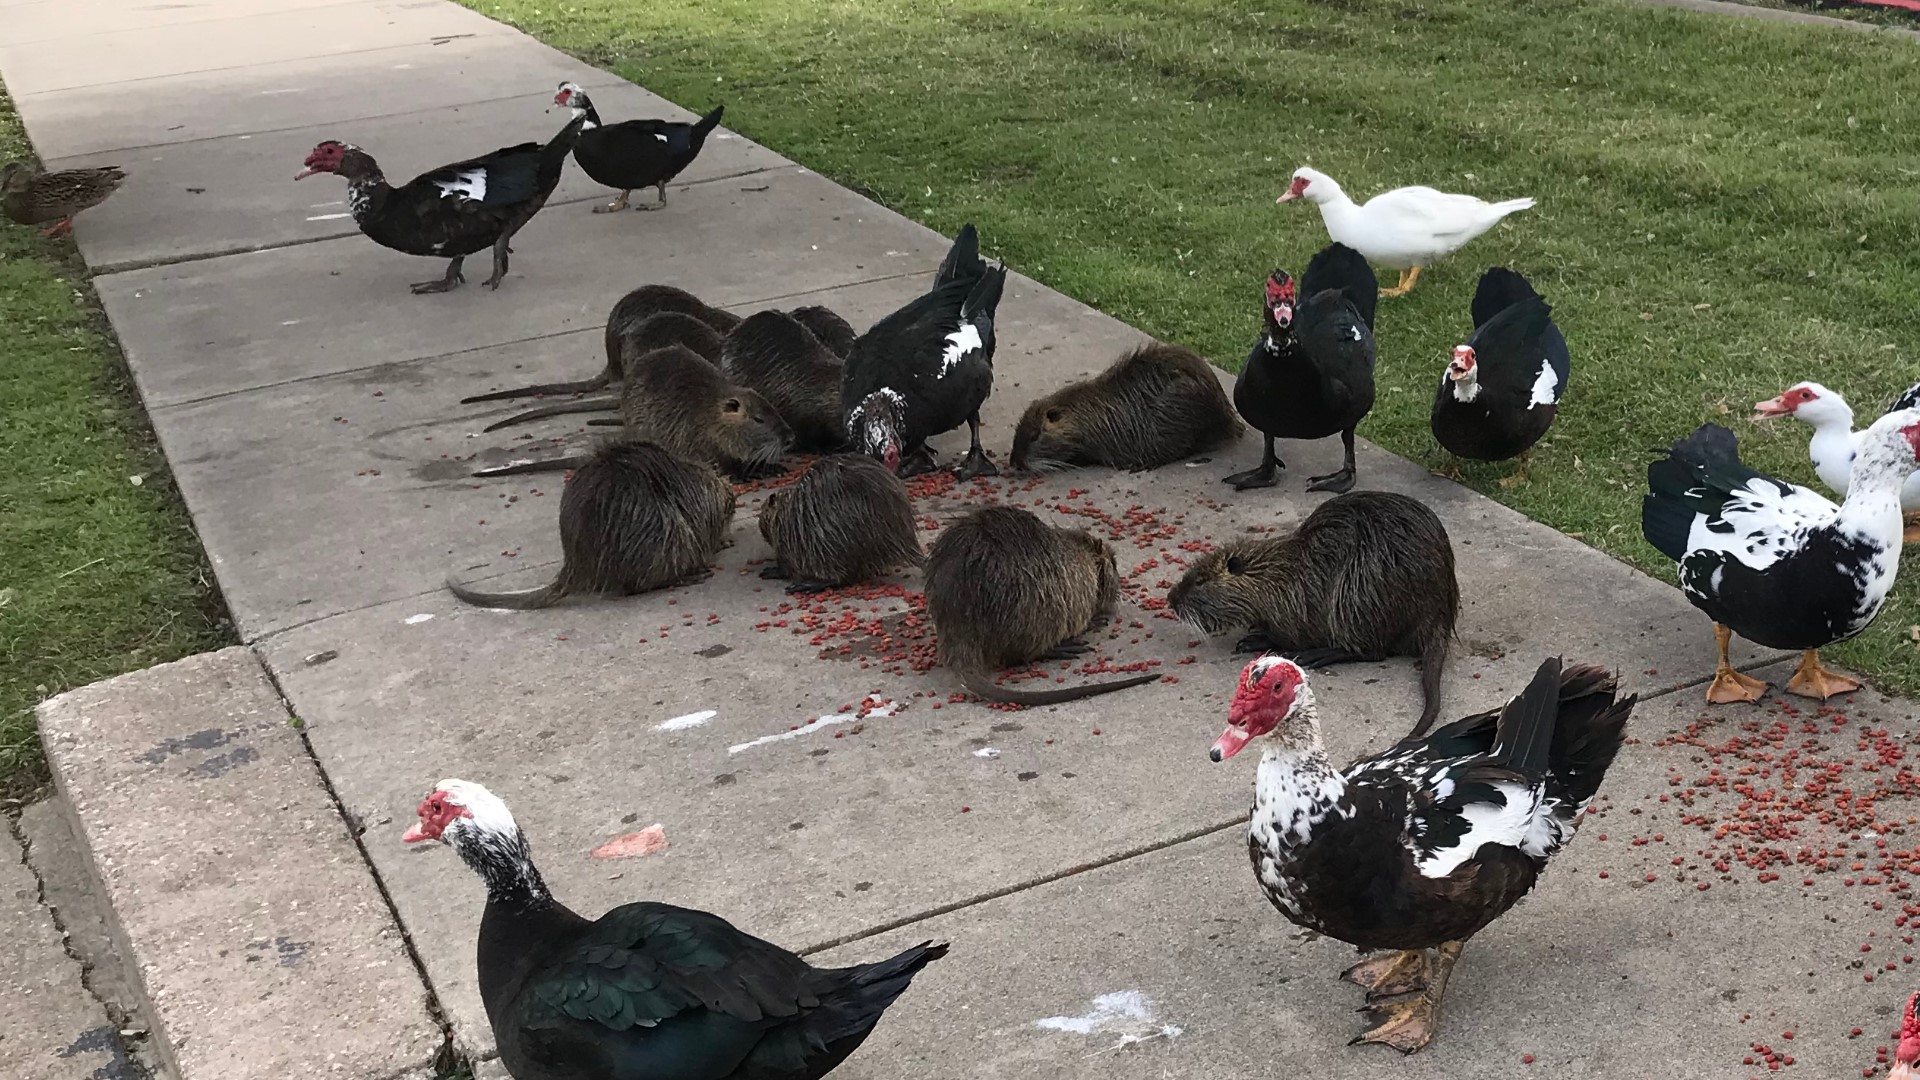 A sizable colony of nutrias has been seen at Krauss Baker Park for at least a year now, and wildlife specialists are asking people not to feed them.